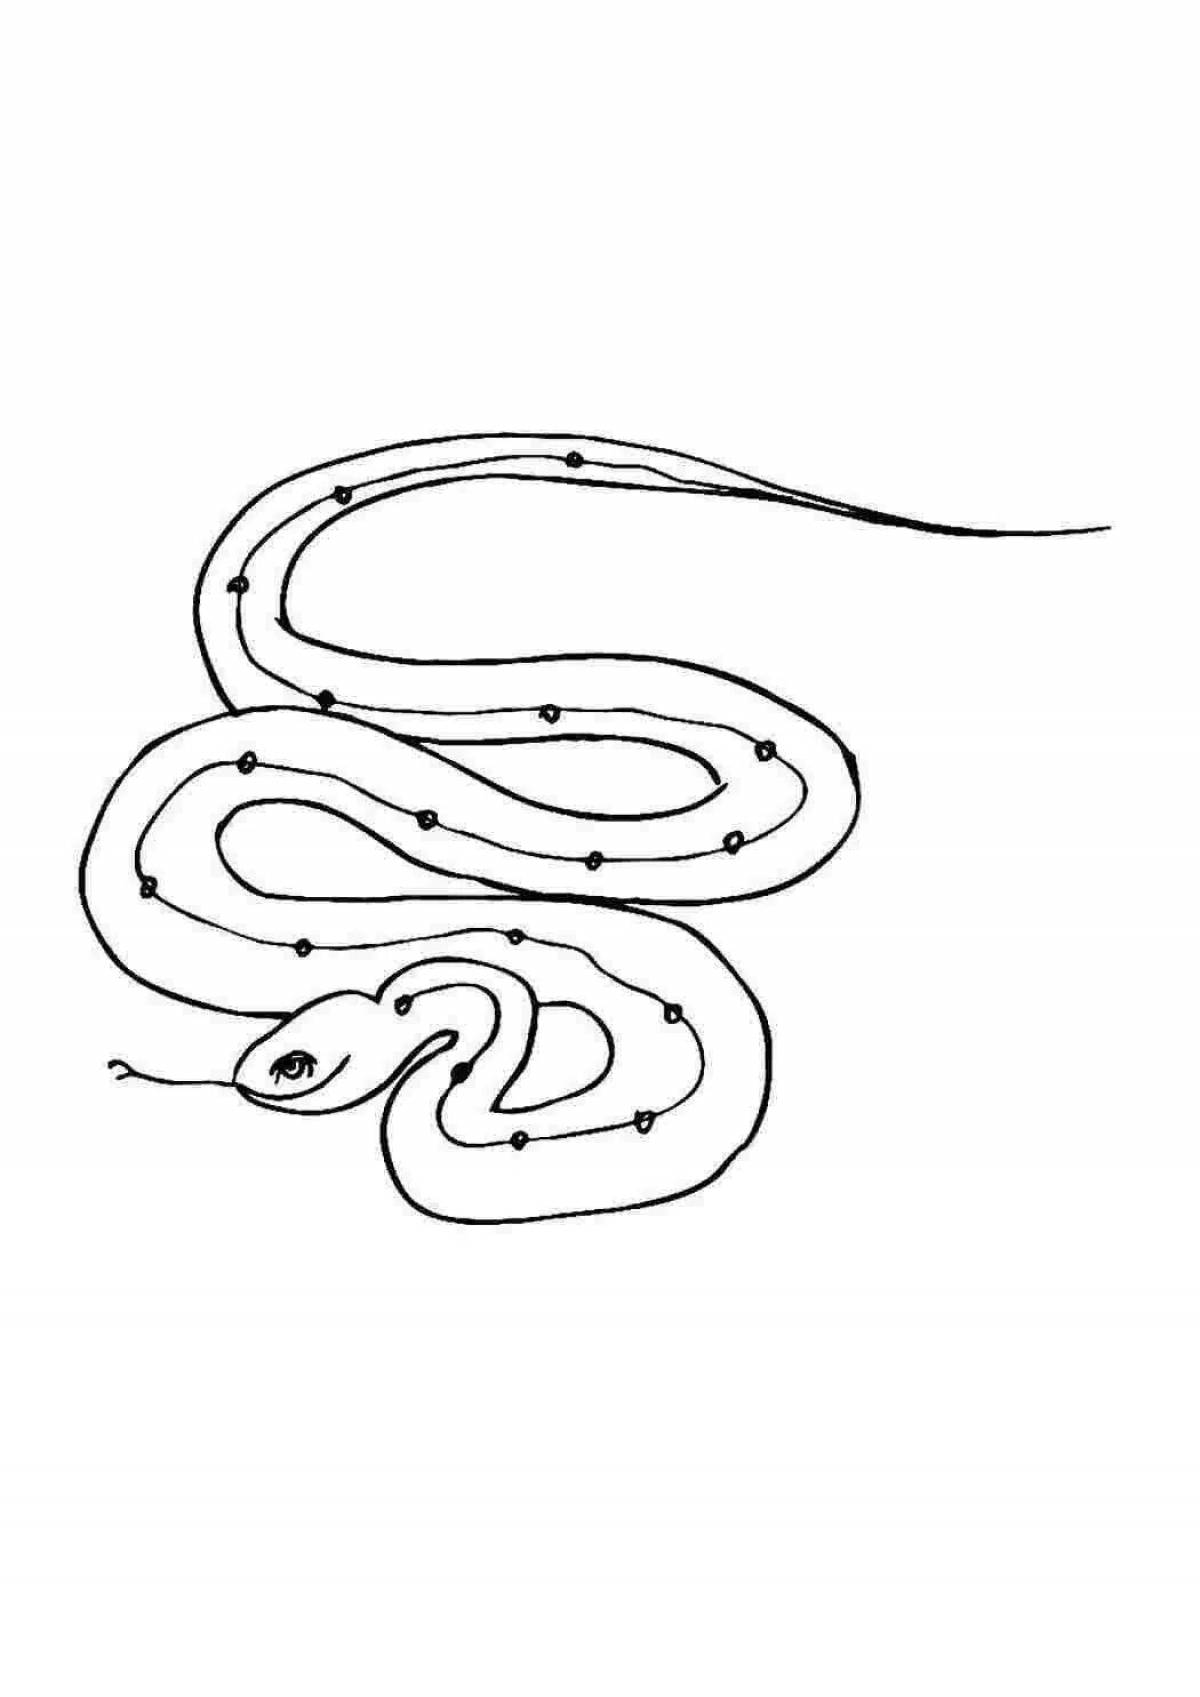 Coloring page graceful steppe viper